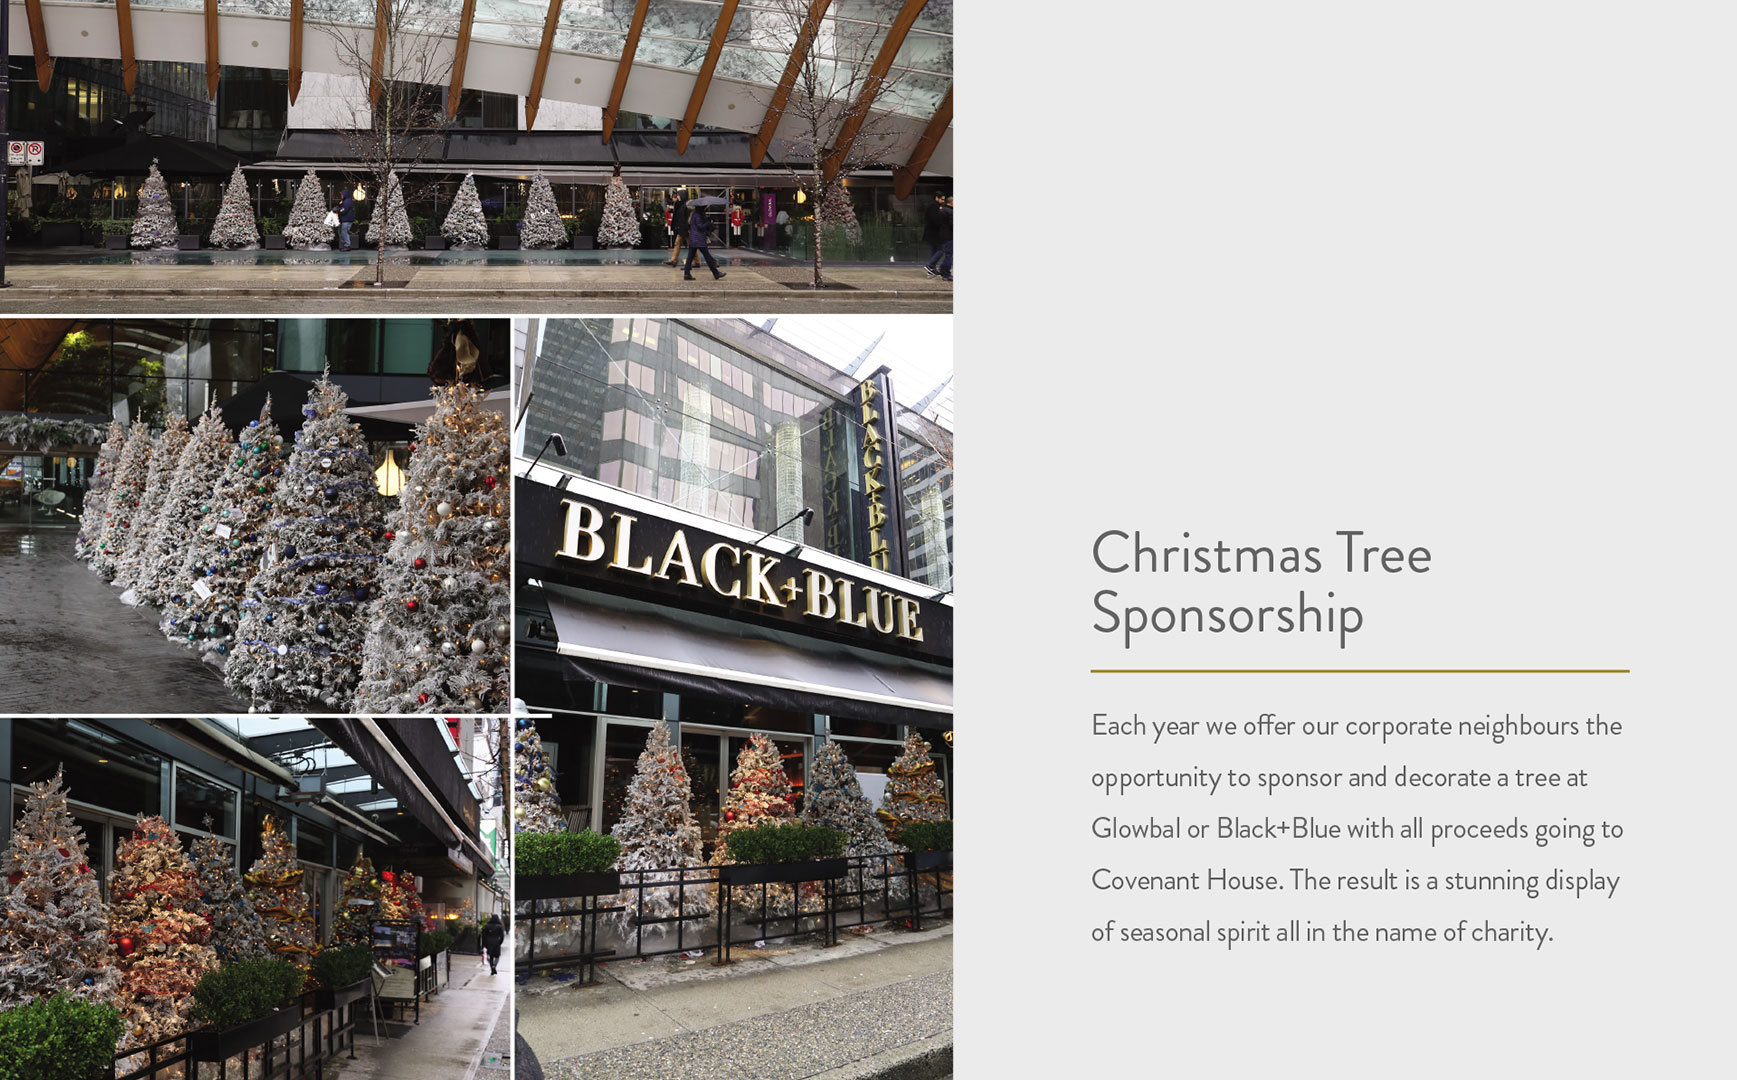 Each year we offer our corporate neighbours the opportunity to sponsor and decorate a tree at Glowbal or Black+Blue with all proceeds going to Covenant House. The result is a stunning display of seasonal spirit all in the name of charity.